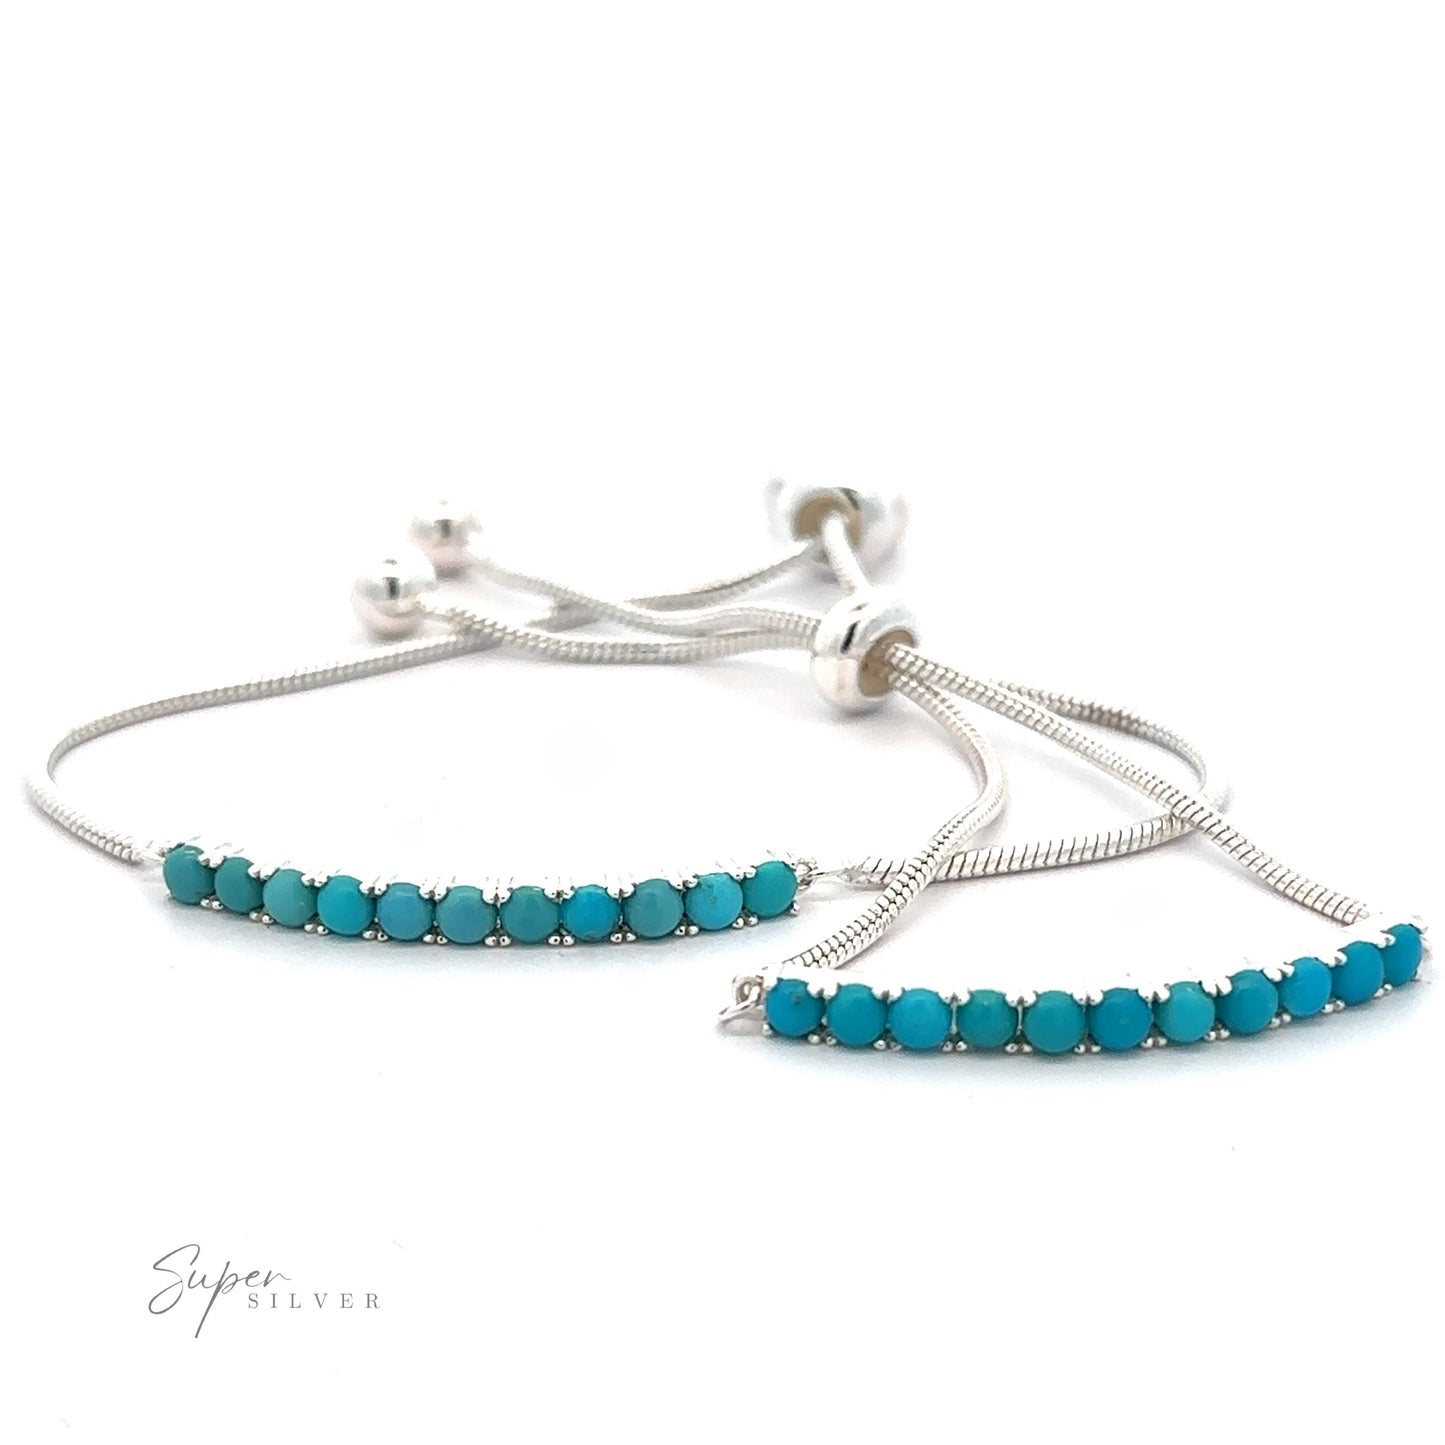 A Silver Adjustable Bracelet with American Turquoise featuring two rows of American turquoise stones with an adjustable snake chain and sliding closure.